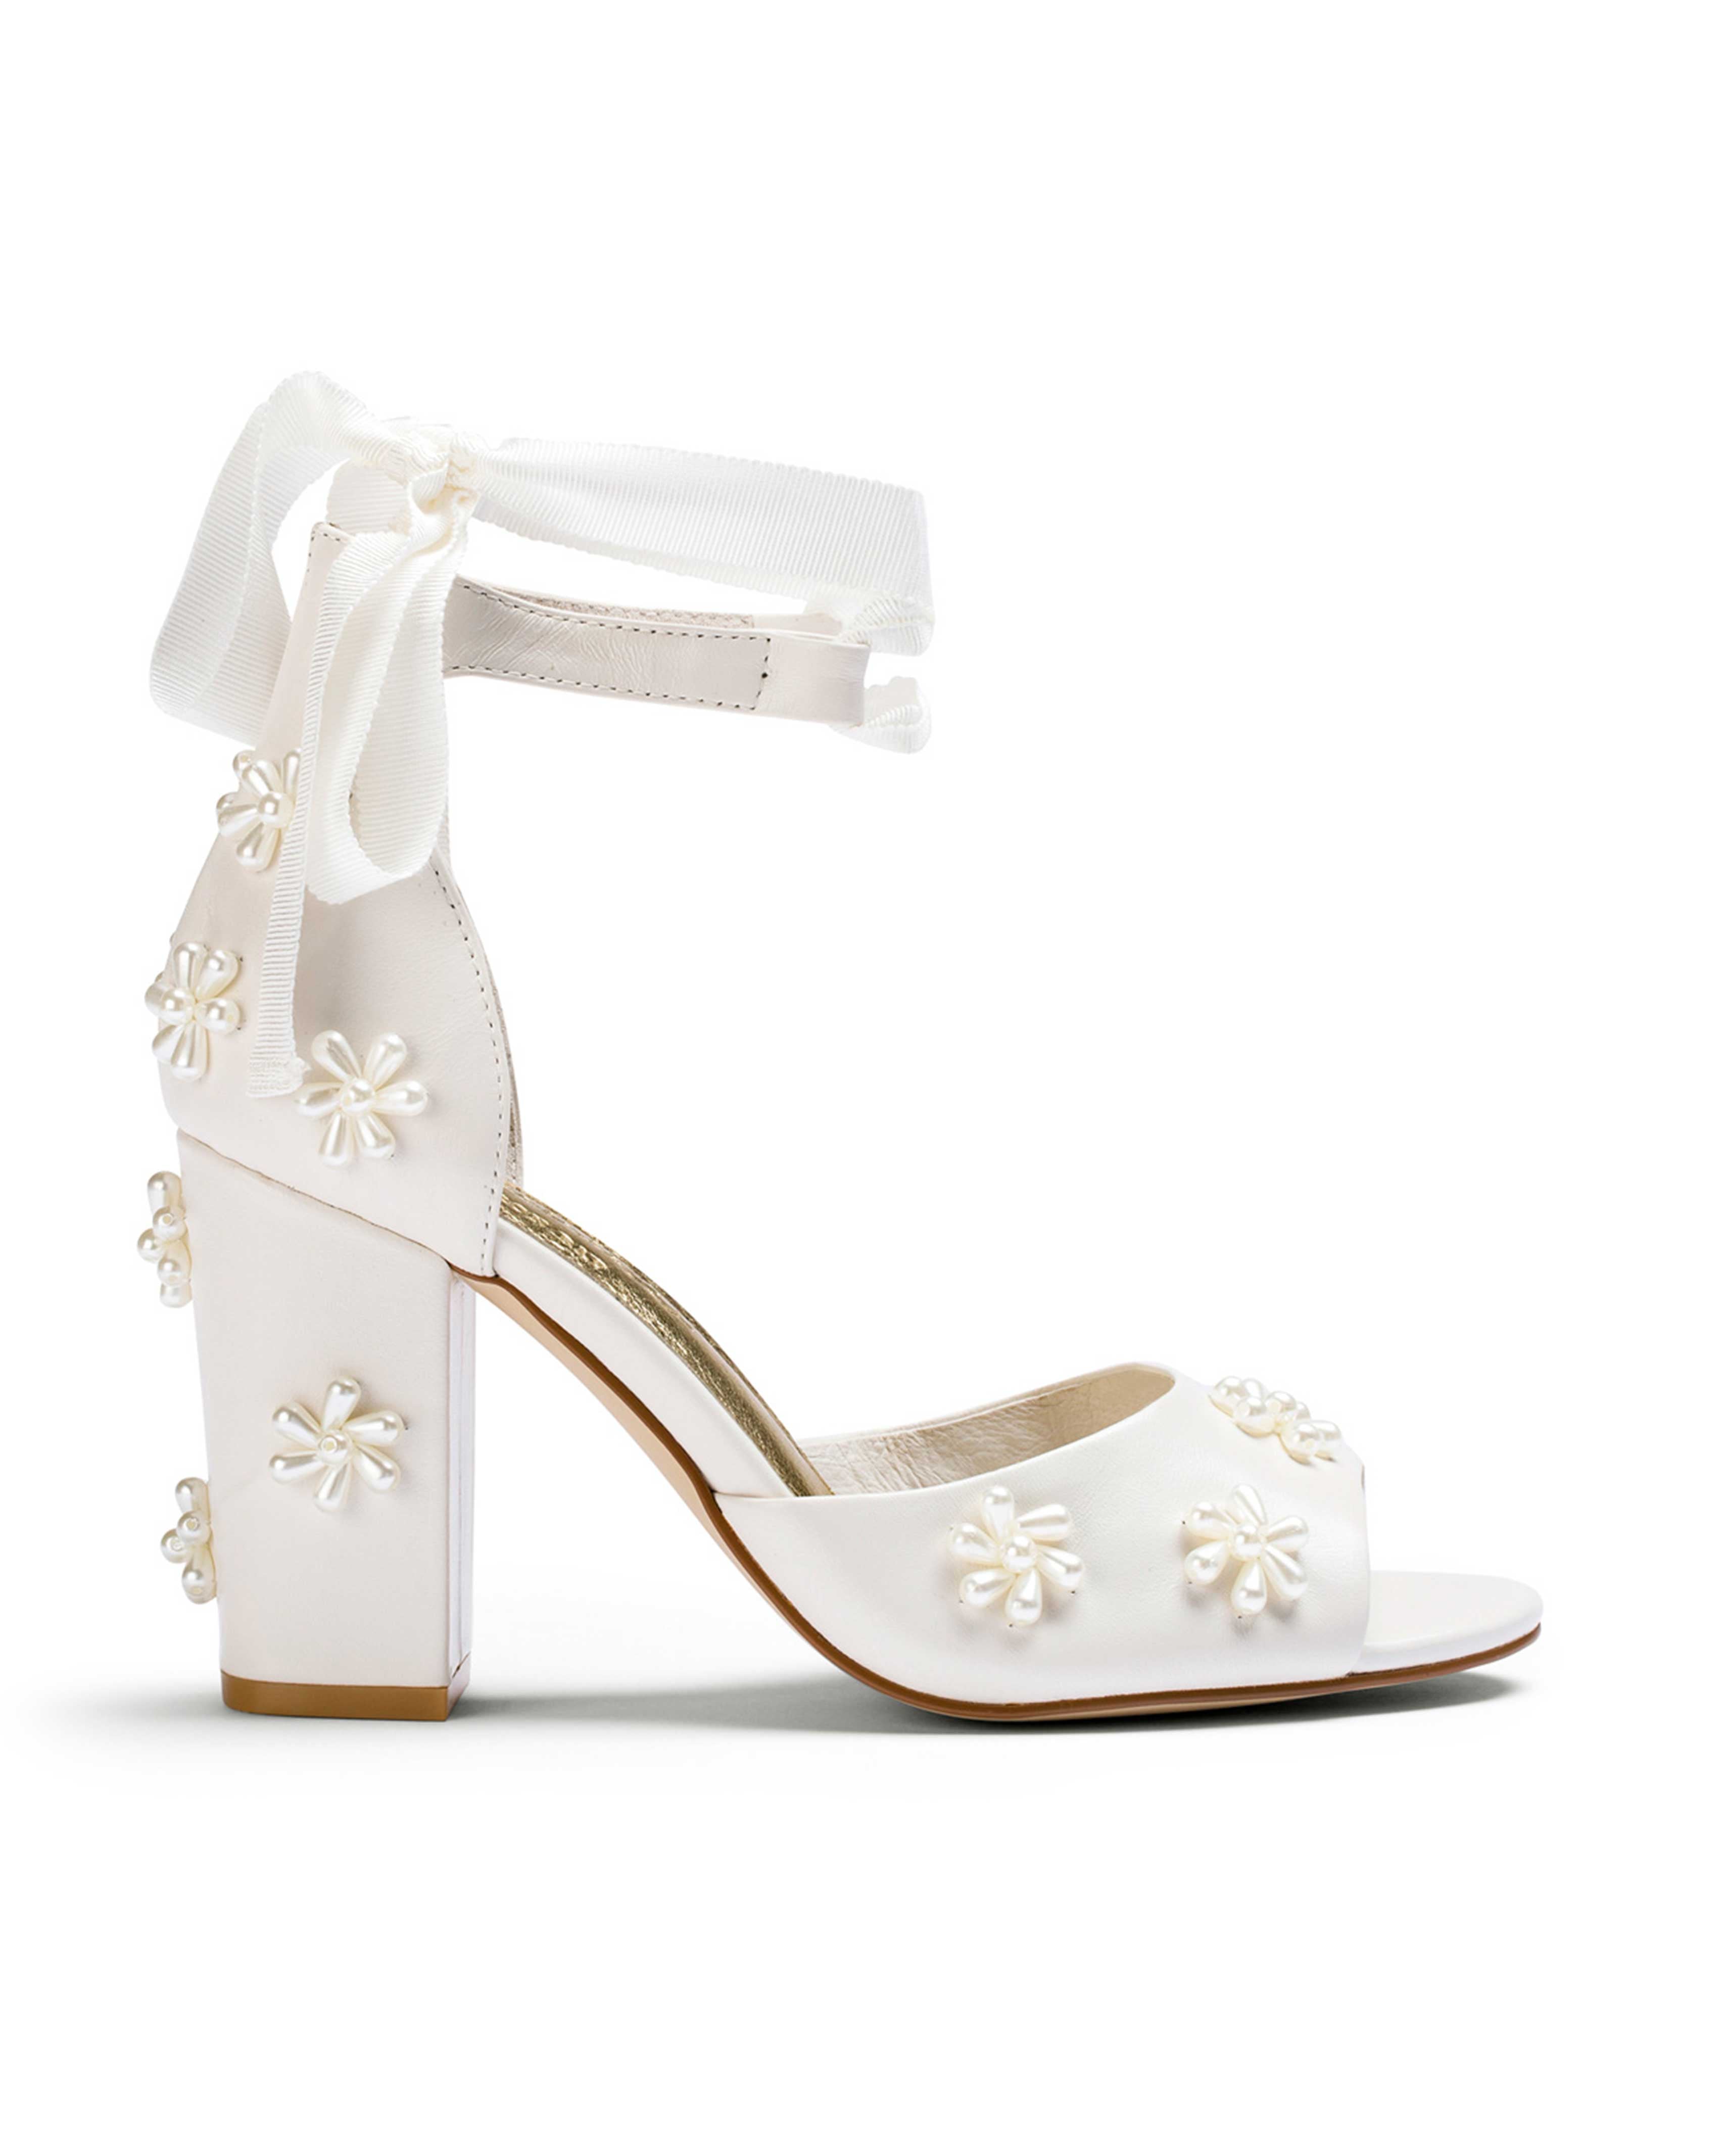 Strappy Stiletto Wedding Shoes with Ankle Ribbon - Anna